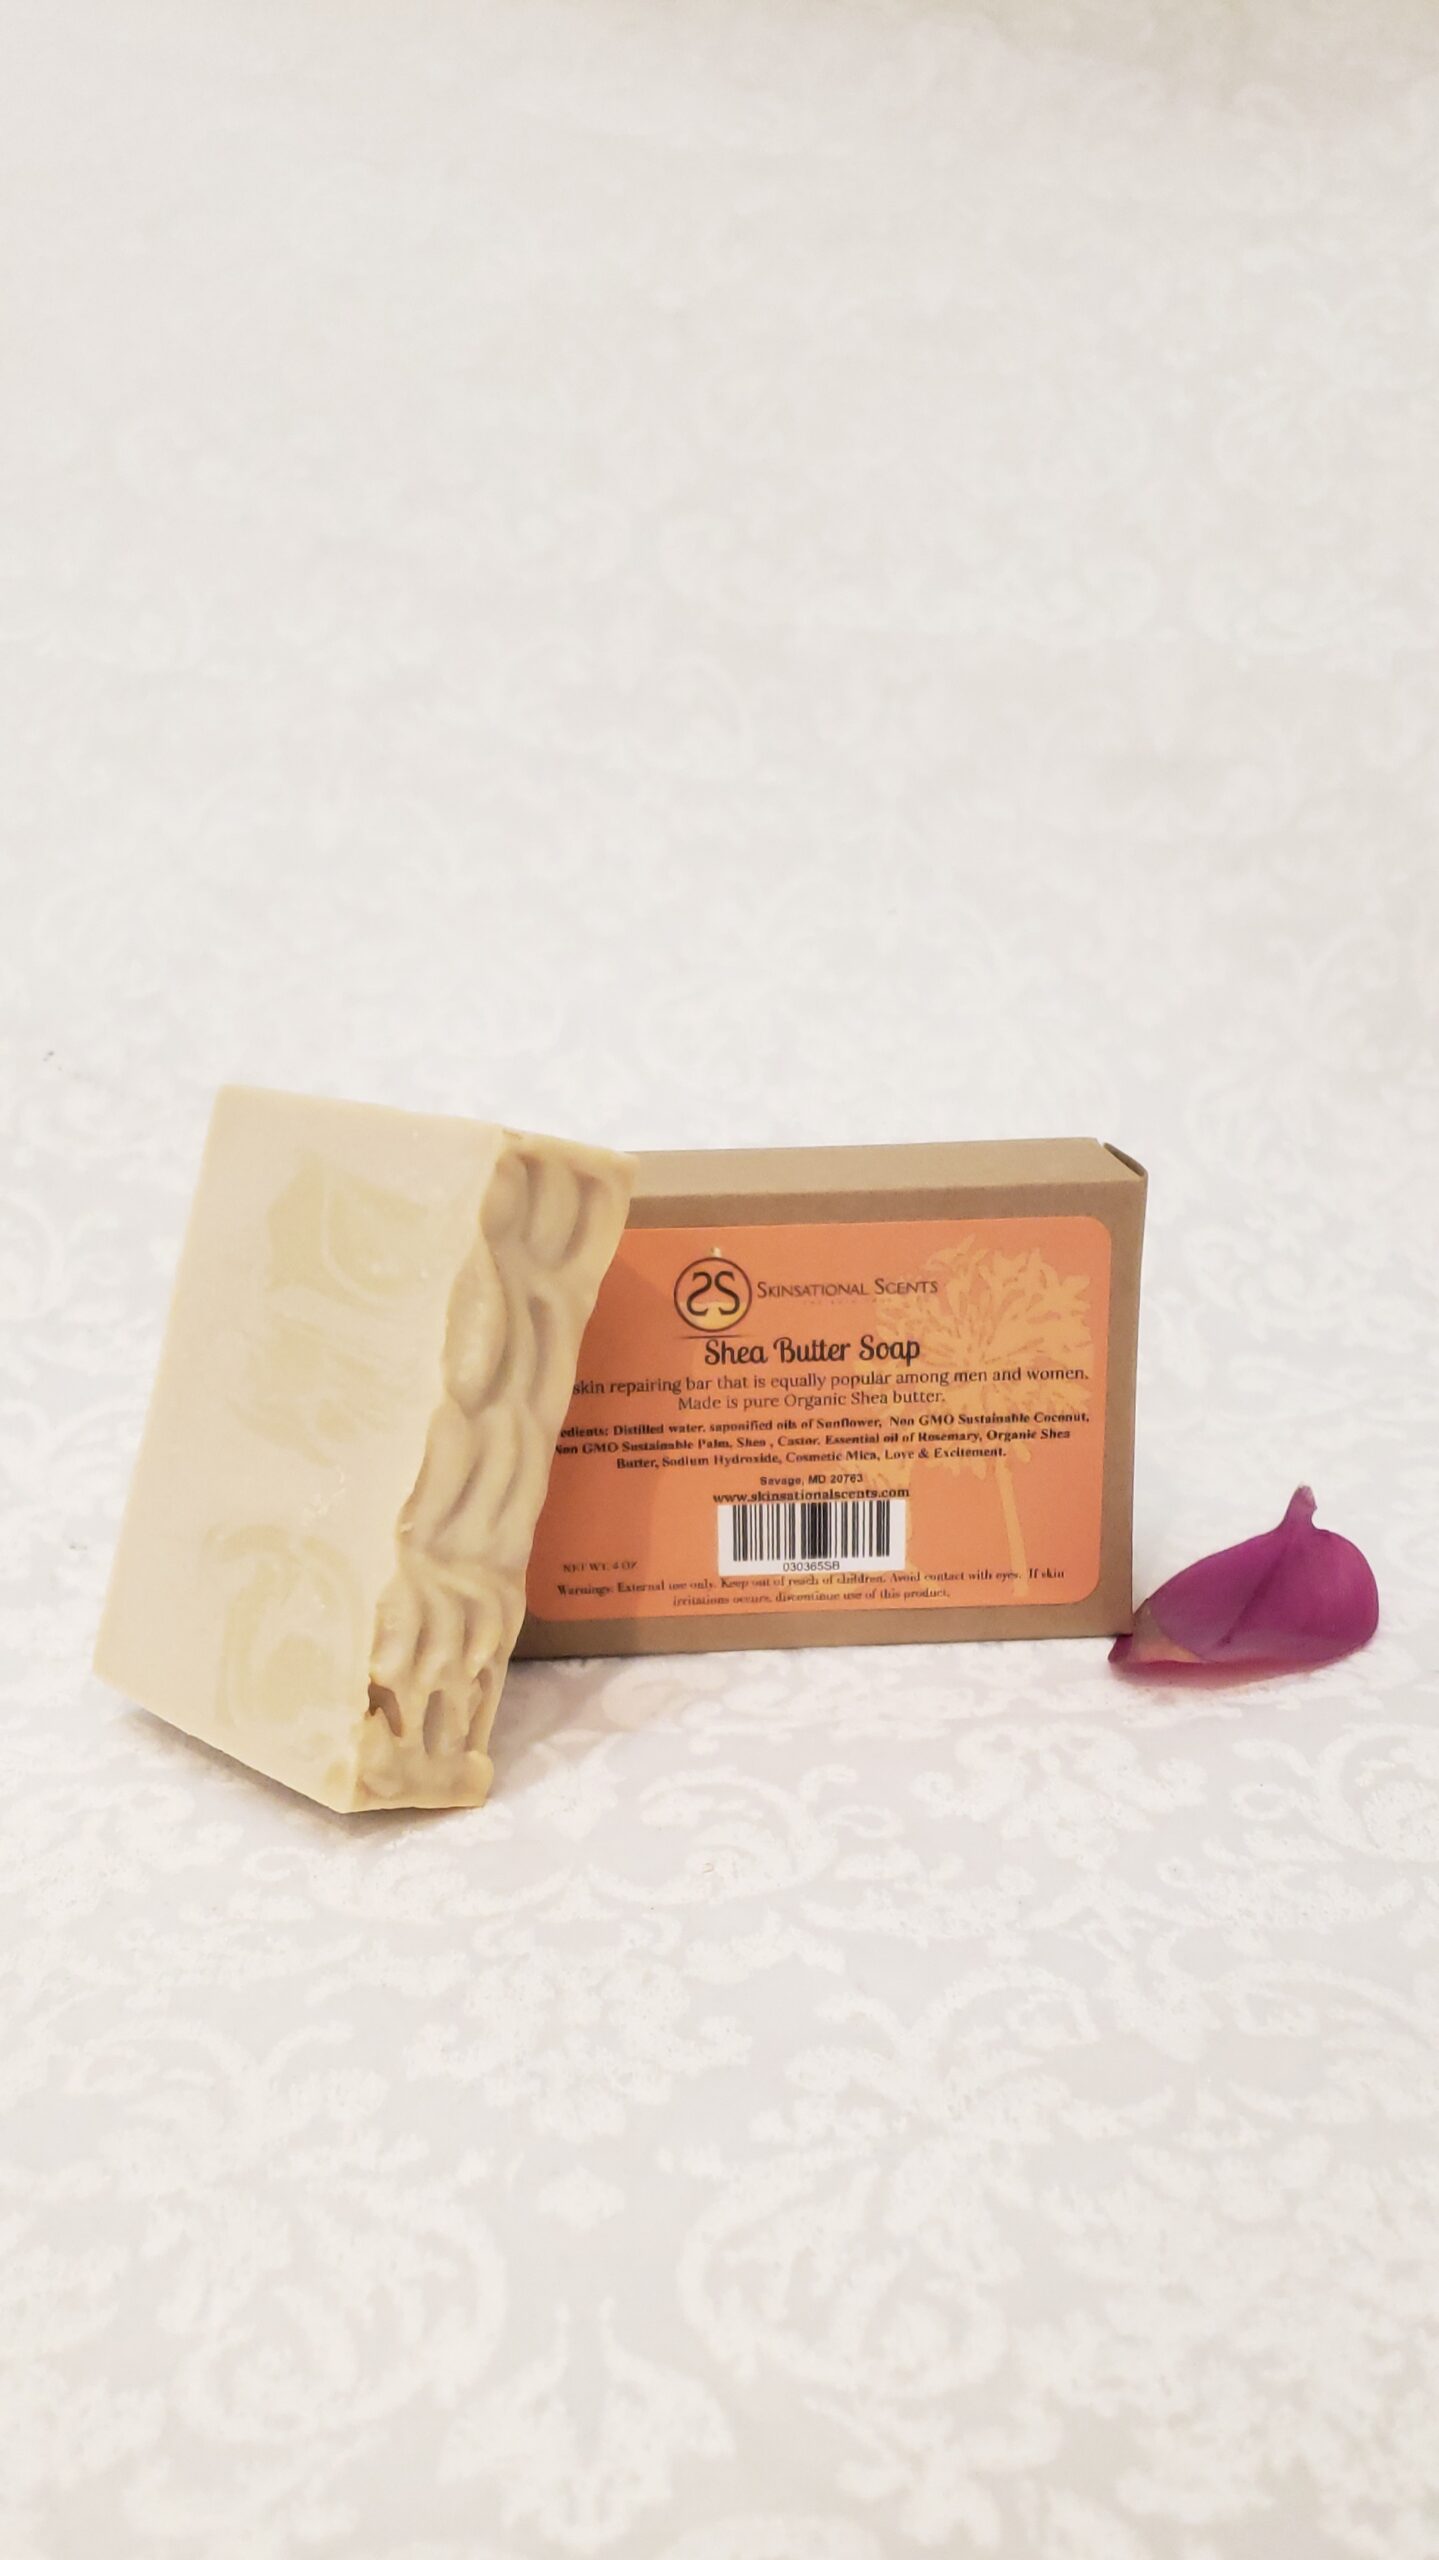 Shea Butter Soap - Midnight Sun  Alpenglow Skin Care, Handcrafted